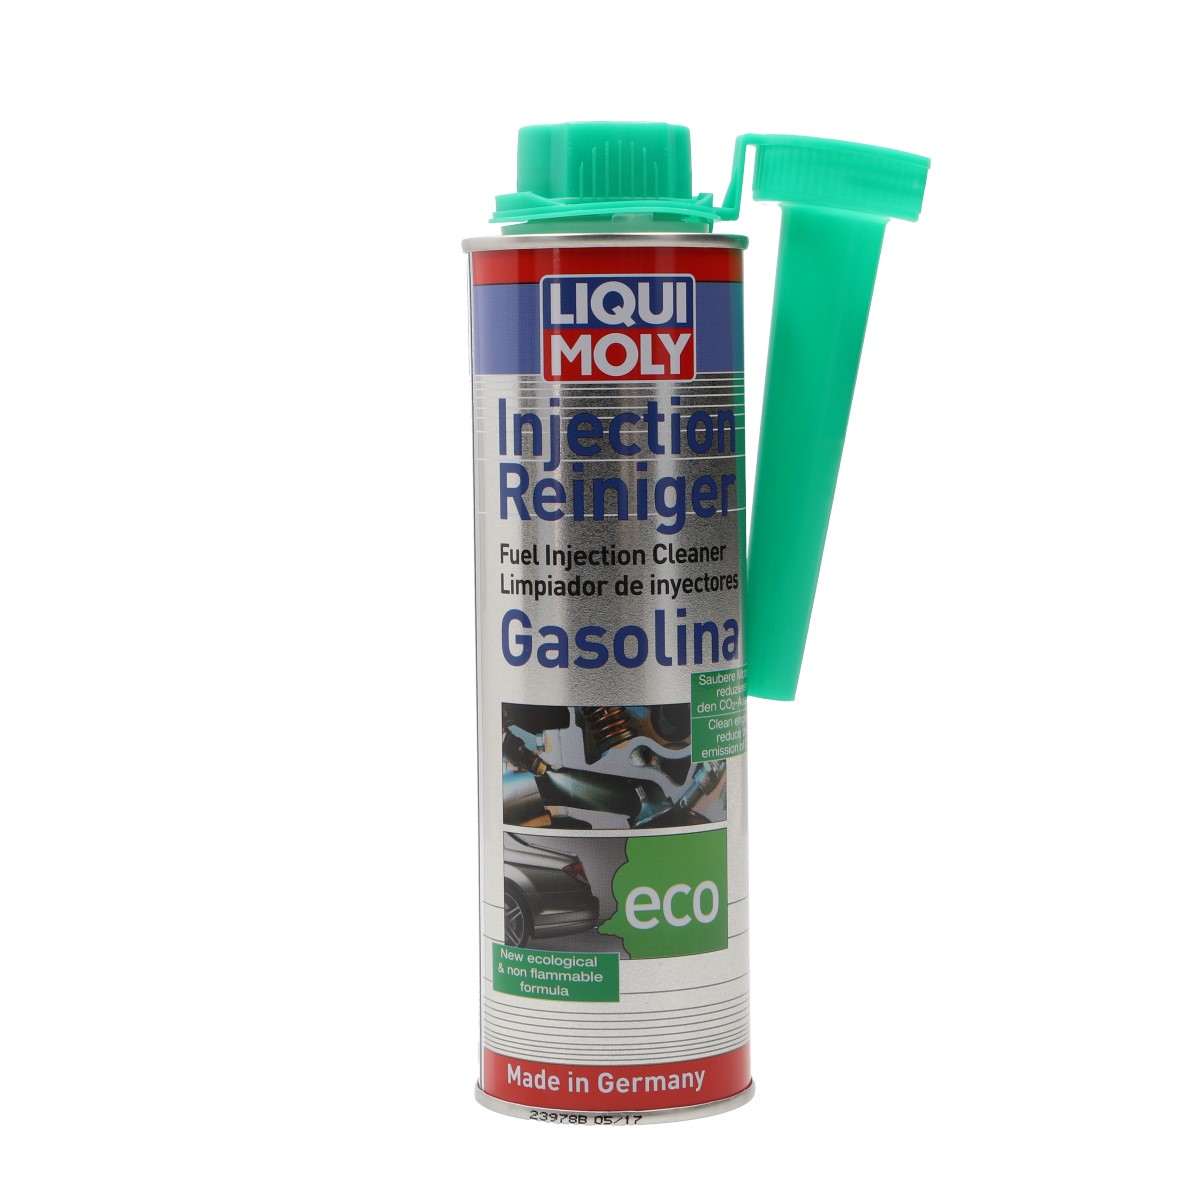 LIMPIA INYECTOR GASOLINA LIQUI MOLY 300ML - Agroplanet